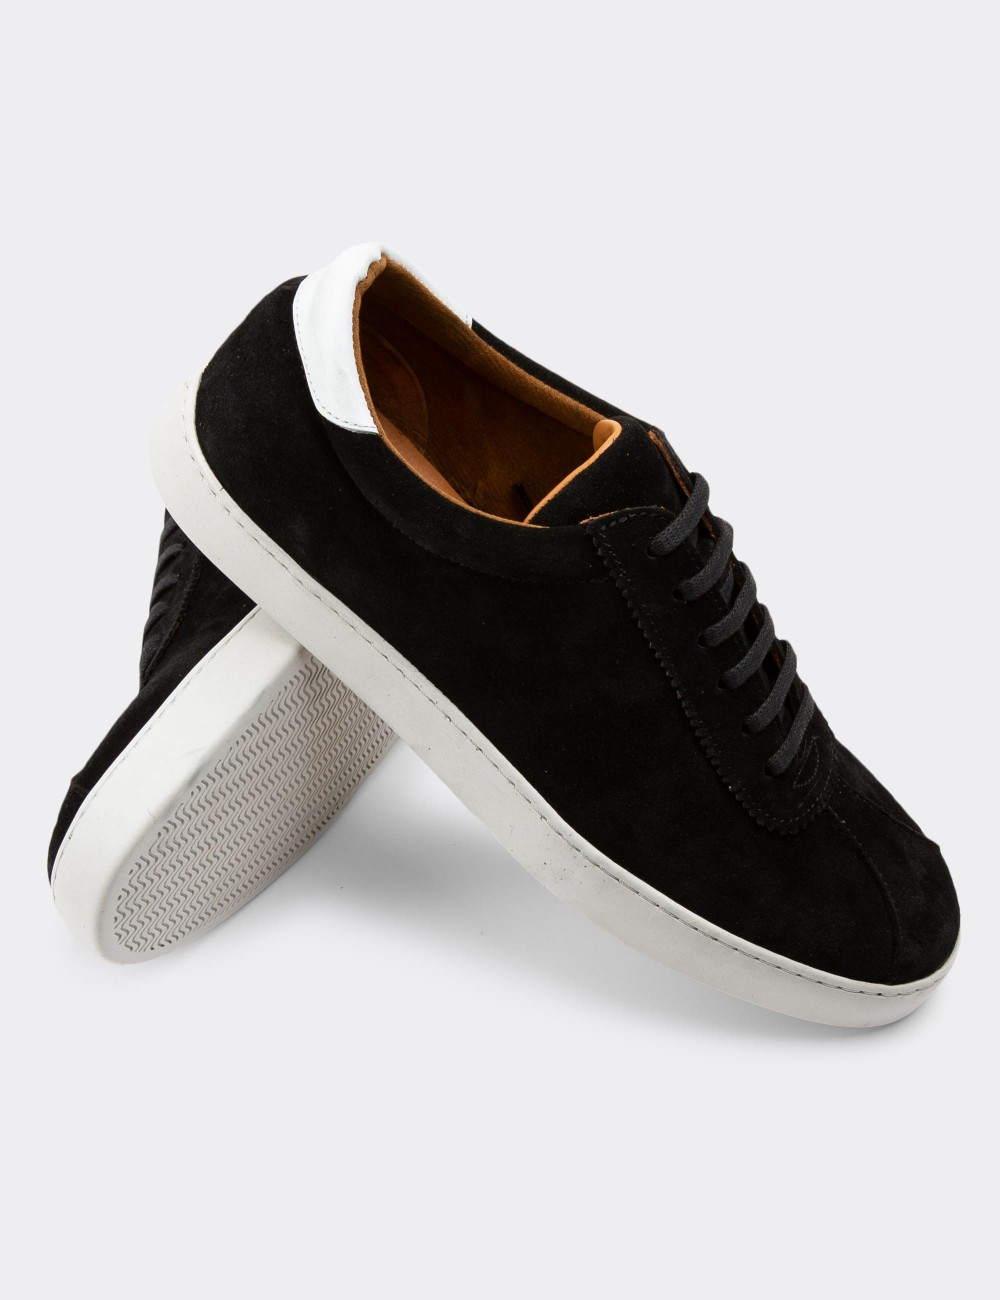 Black Suede Leather Sneakers - 01885MSYHC01